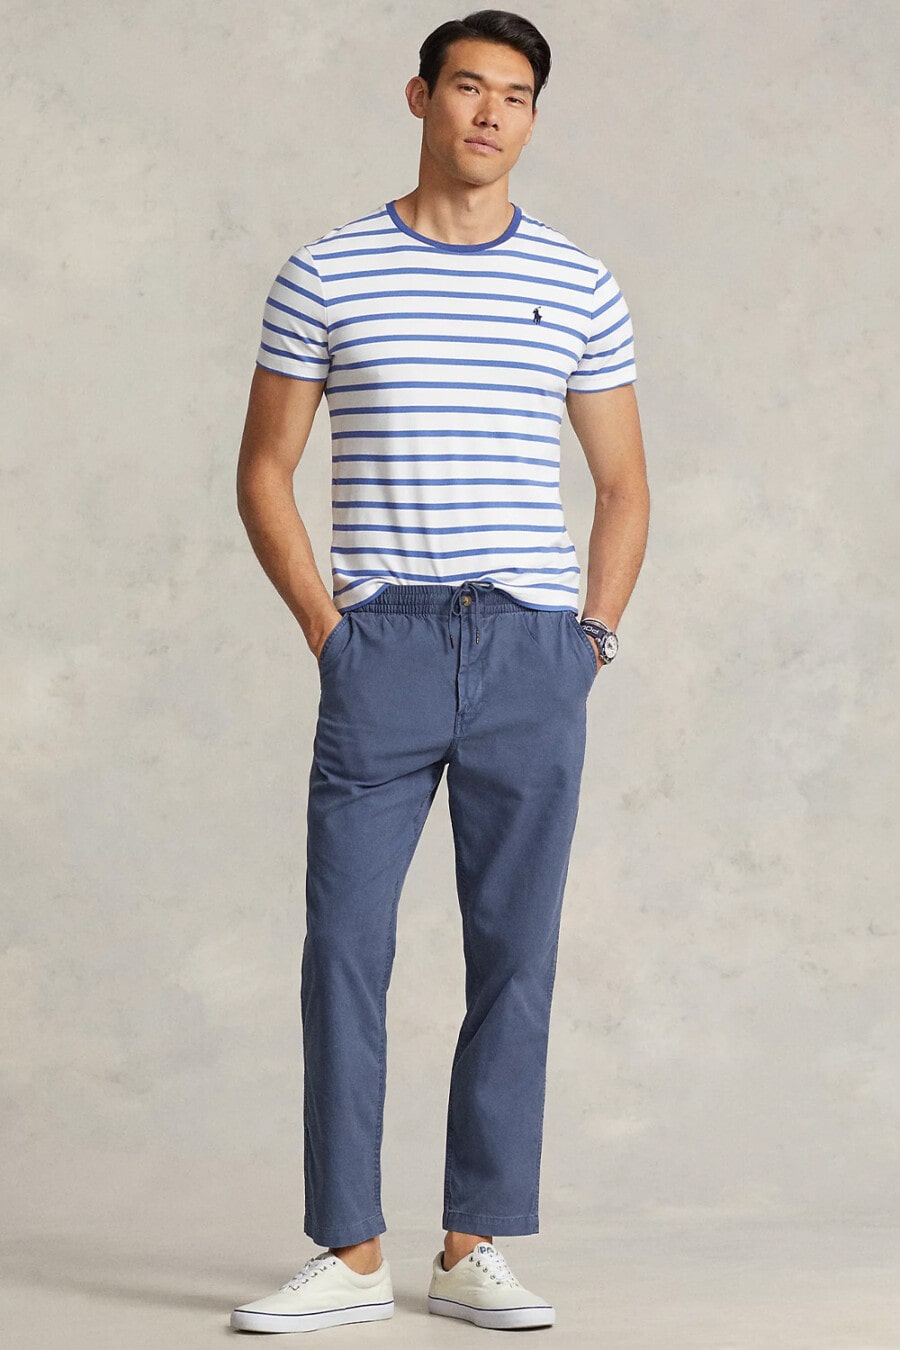 Men's mid blue pants, white/blue Breton t-shirt and off-white canvas skate shoes outfit by Ralph Lauren